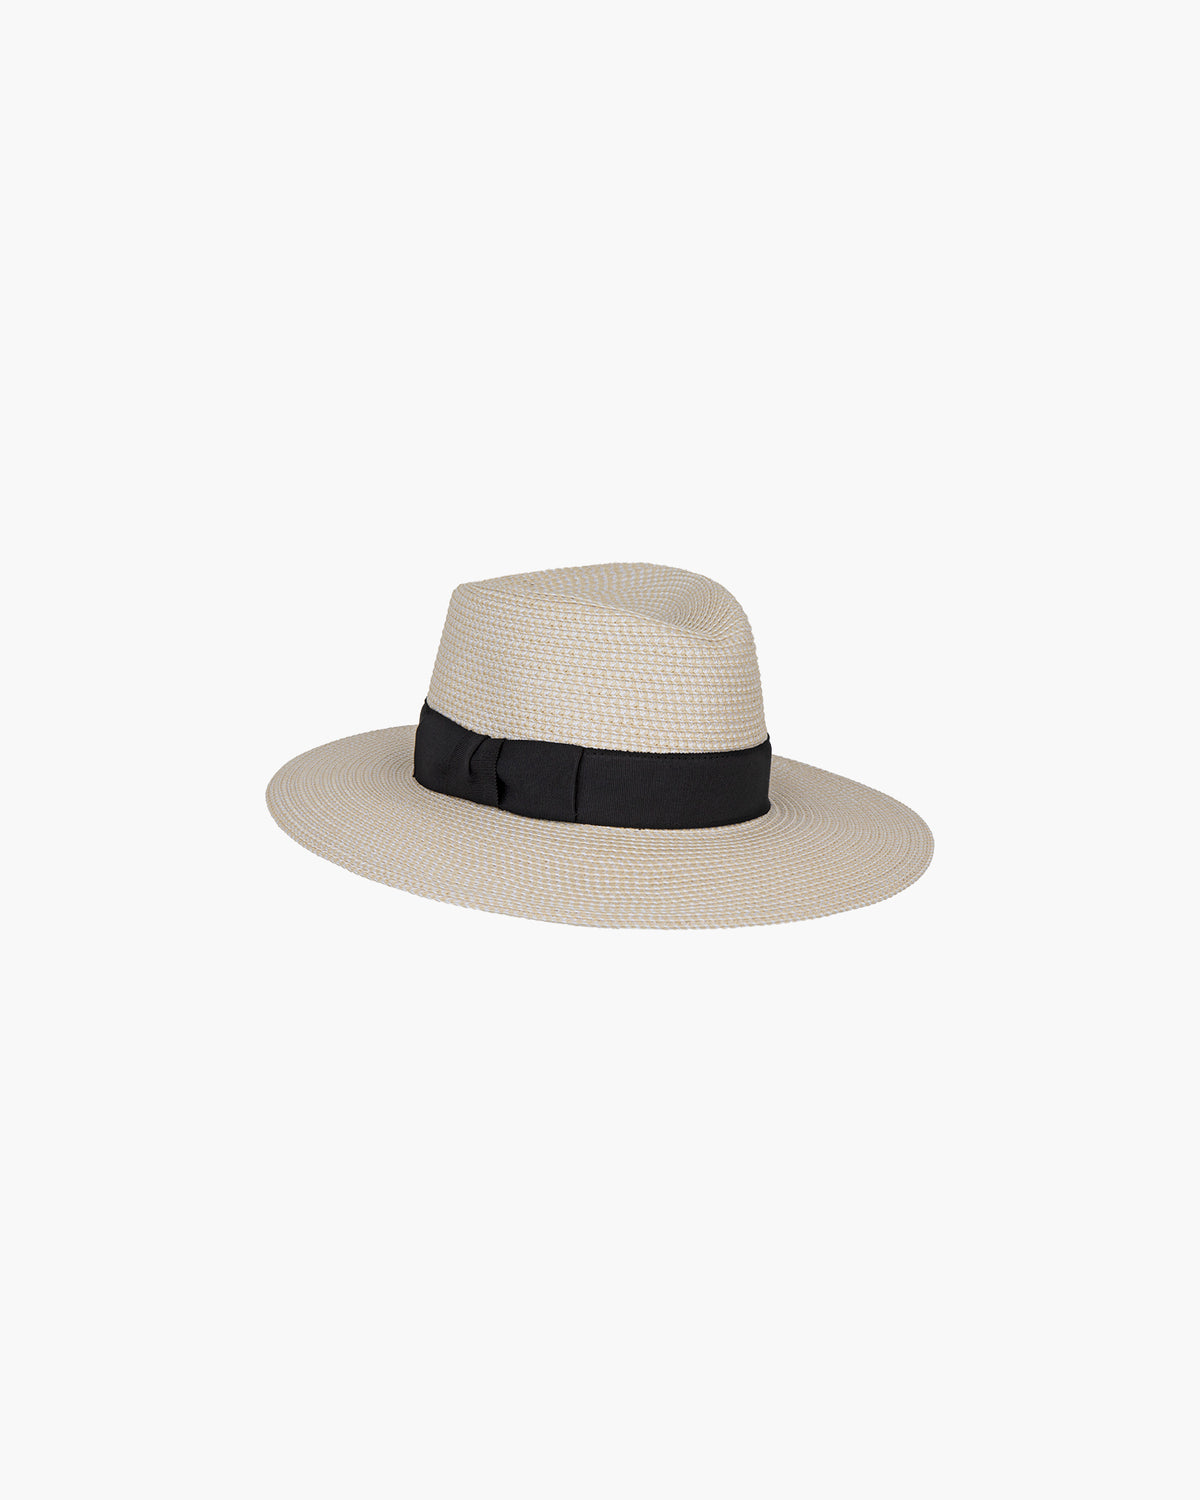 Fedora Hats For Women With Wide & Short Brims I Eric Javits